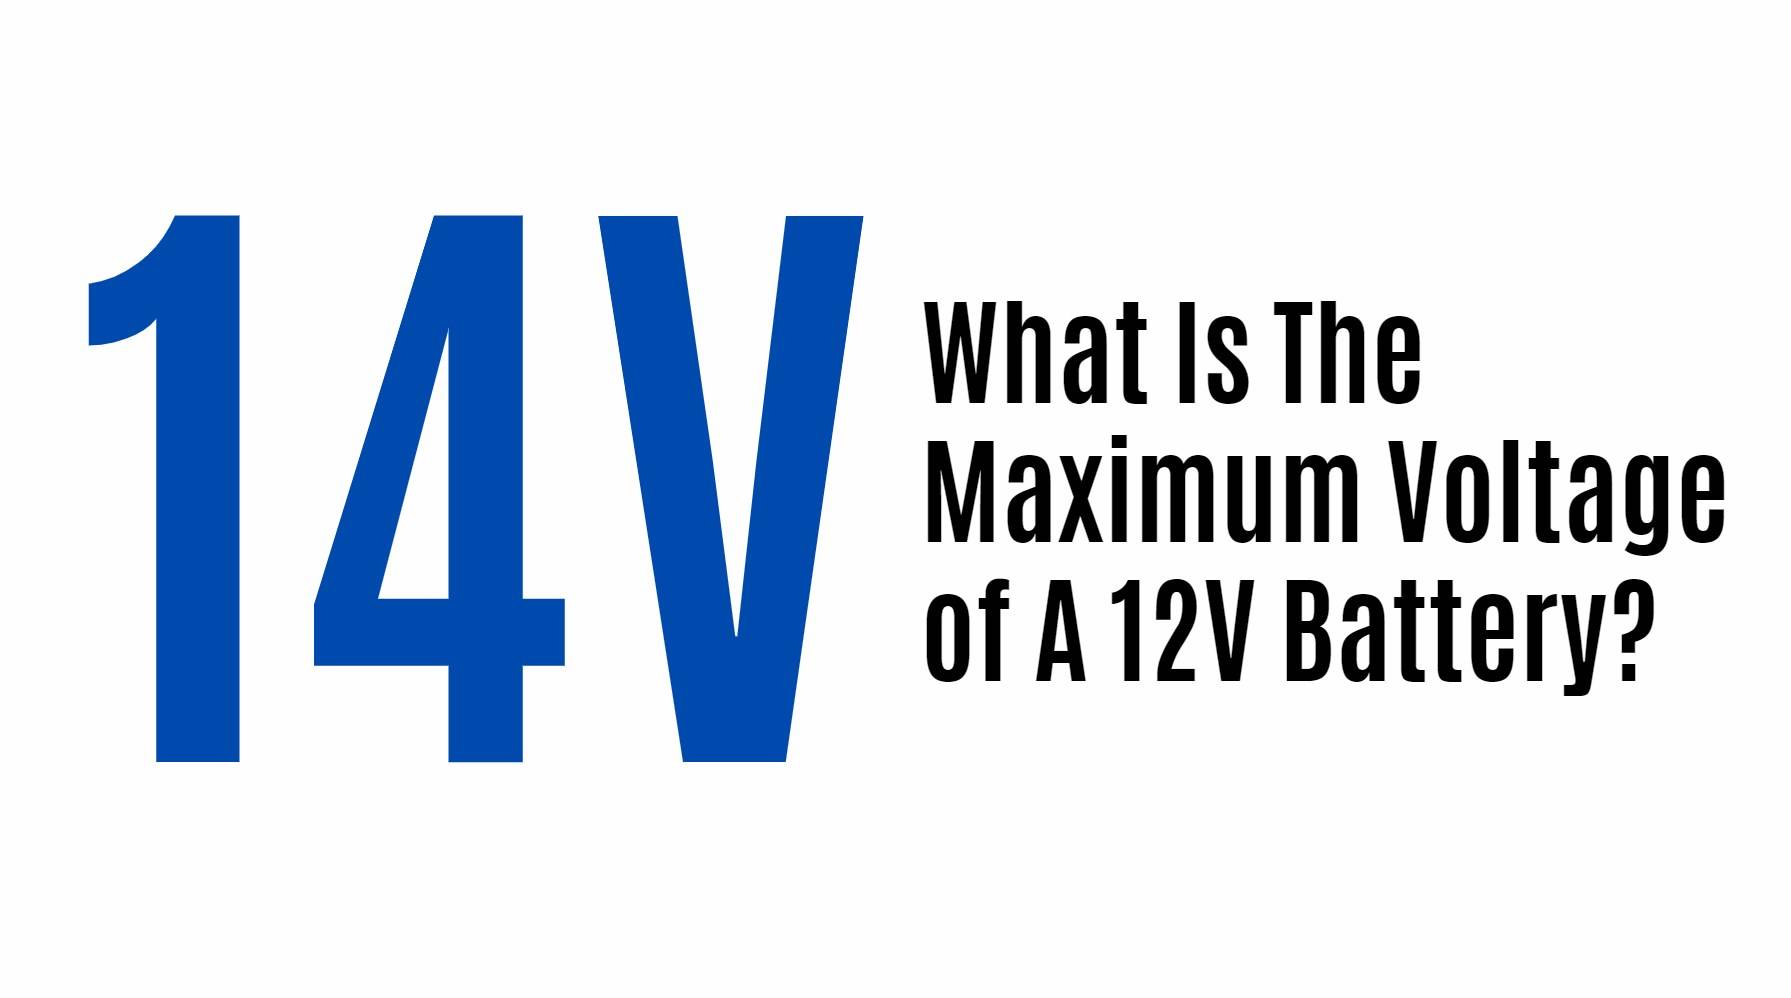 What Is The Maximum Voltage of A 12v Battery?